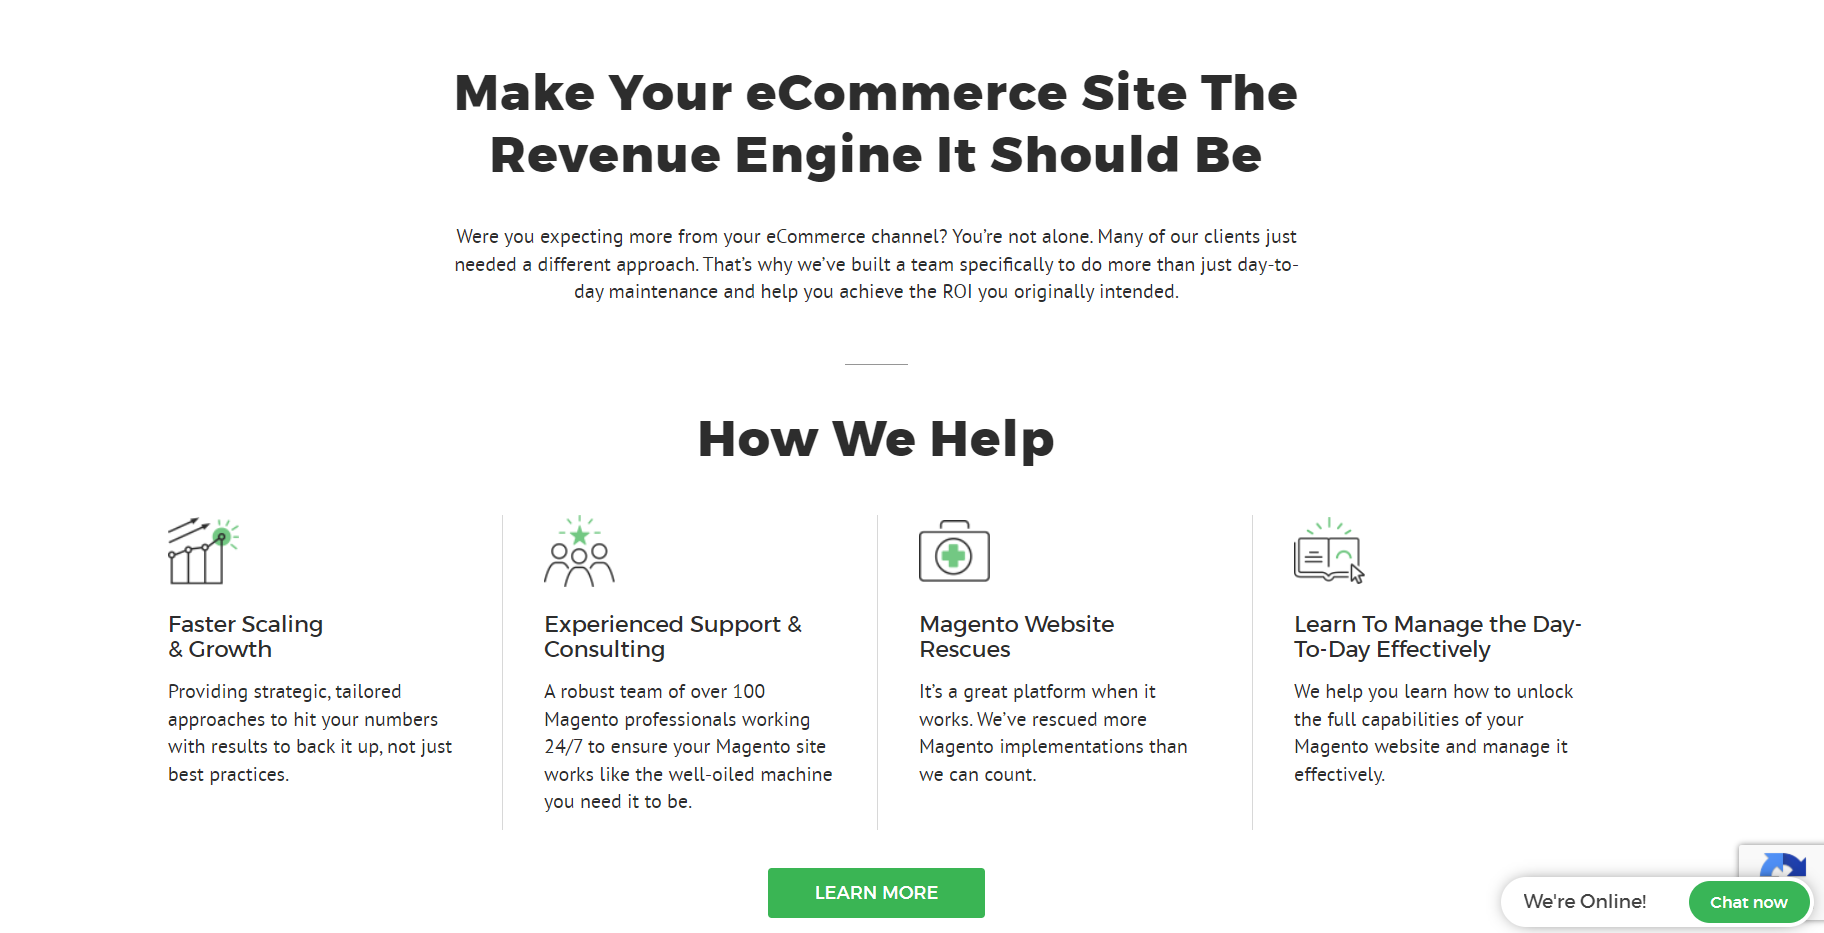 Forix Web Design is a highly reputed company that specializes in custom-tailored eCommerce solutions